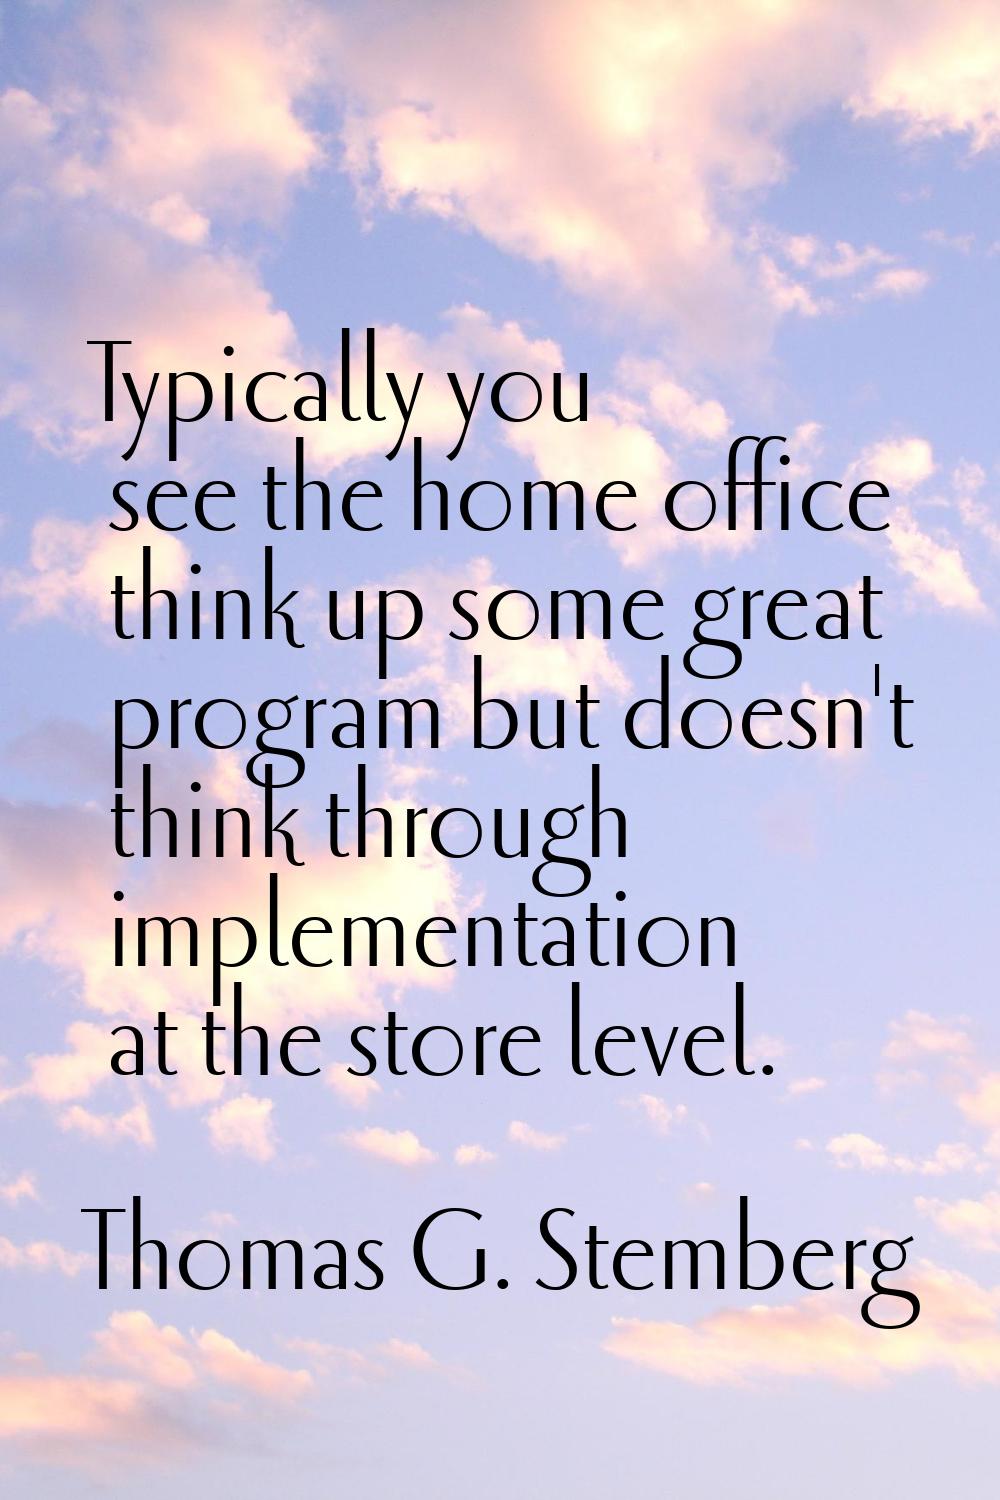 Typically you see the home office think up some great program but doesn't think through implementat